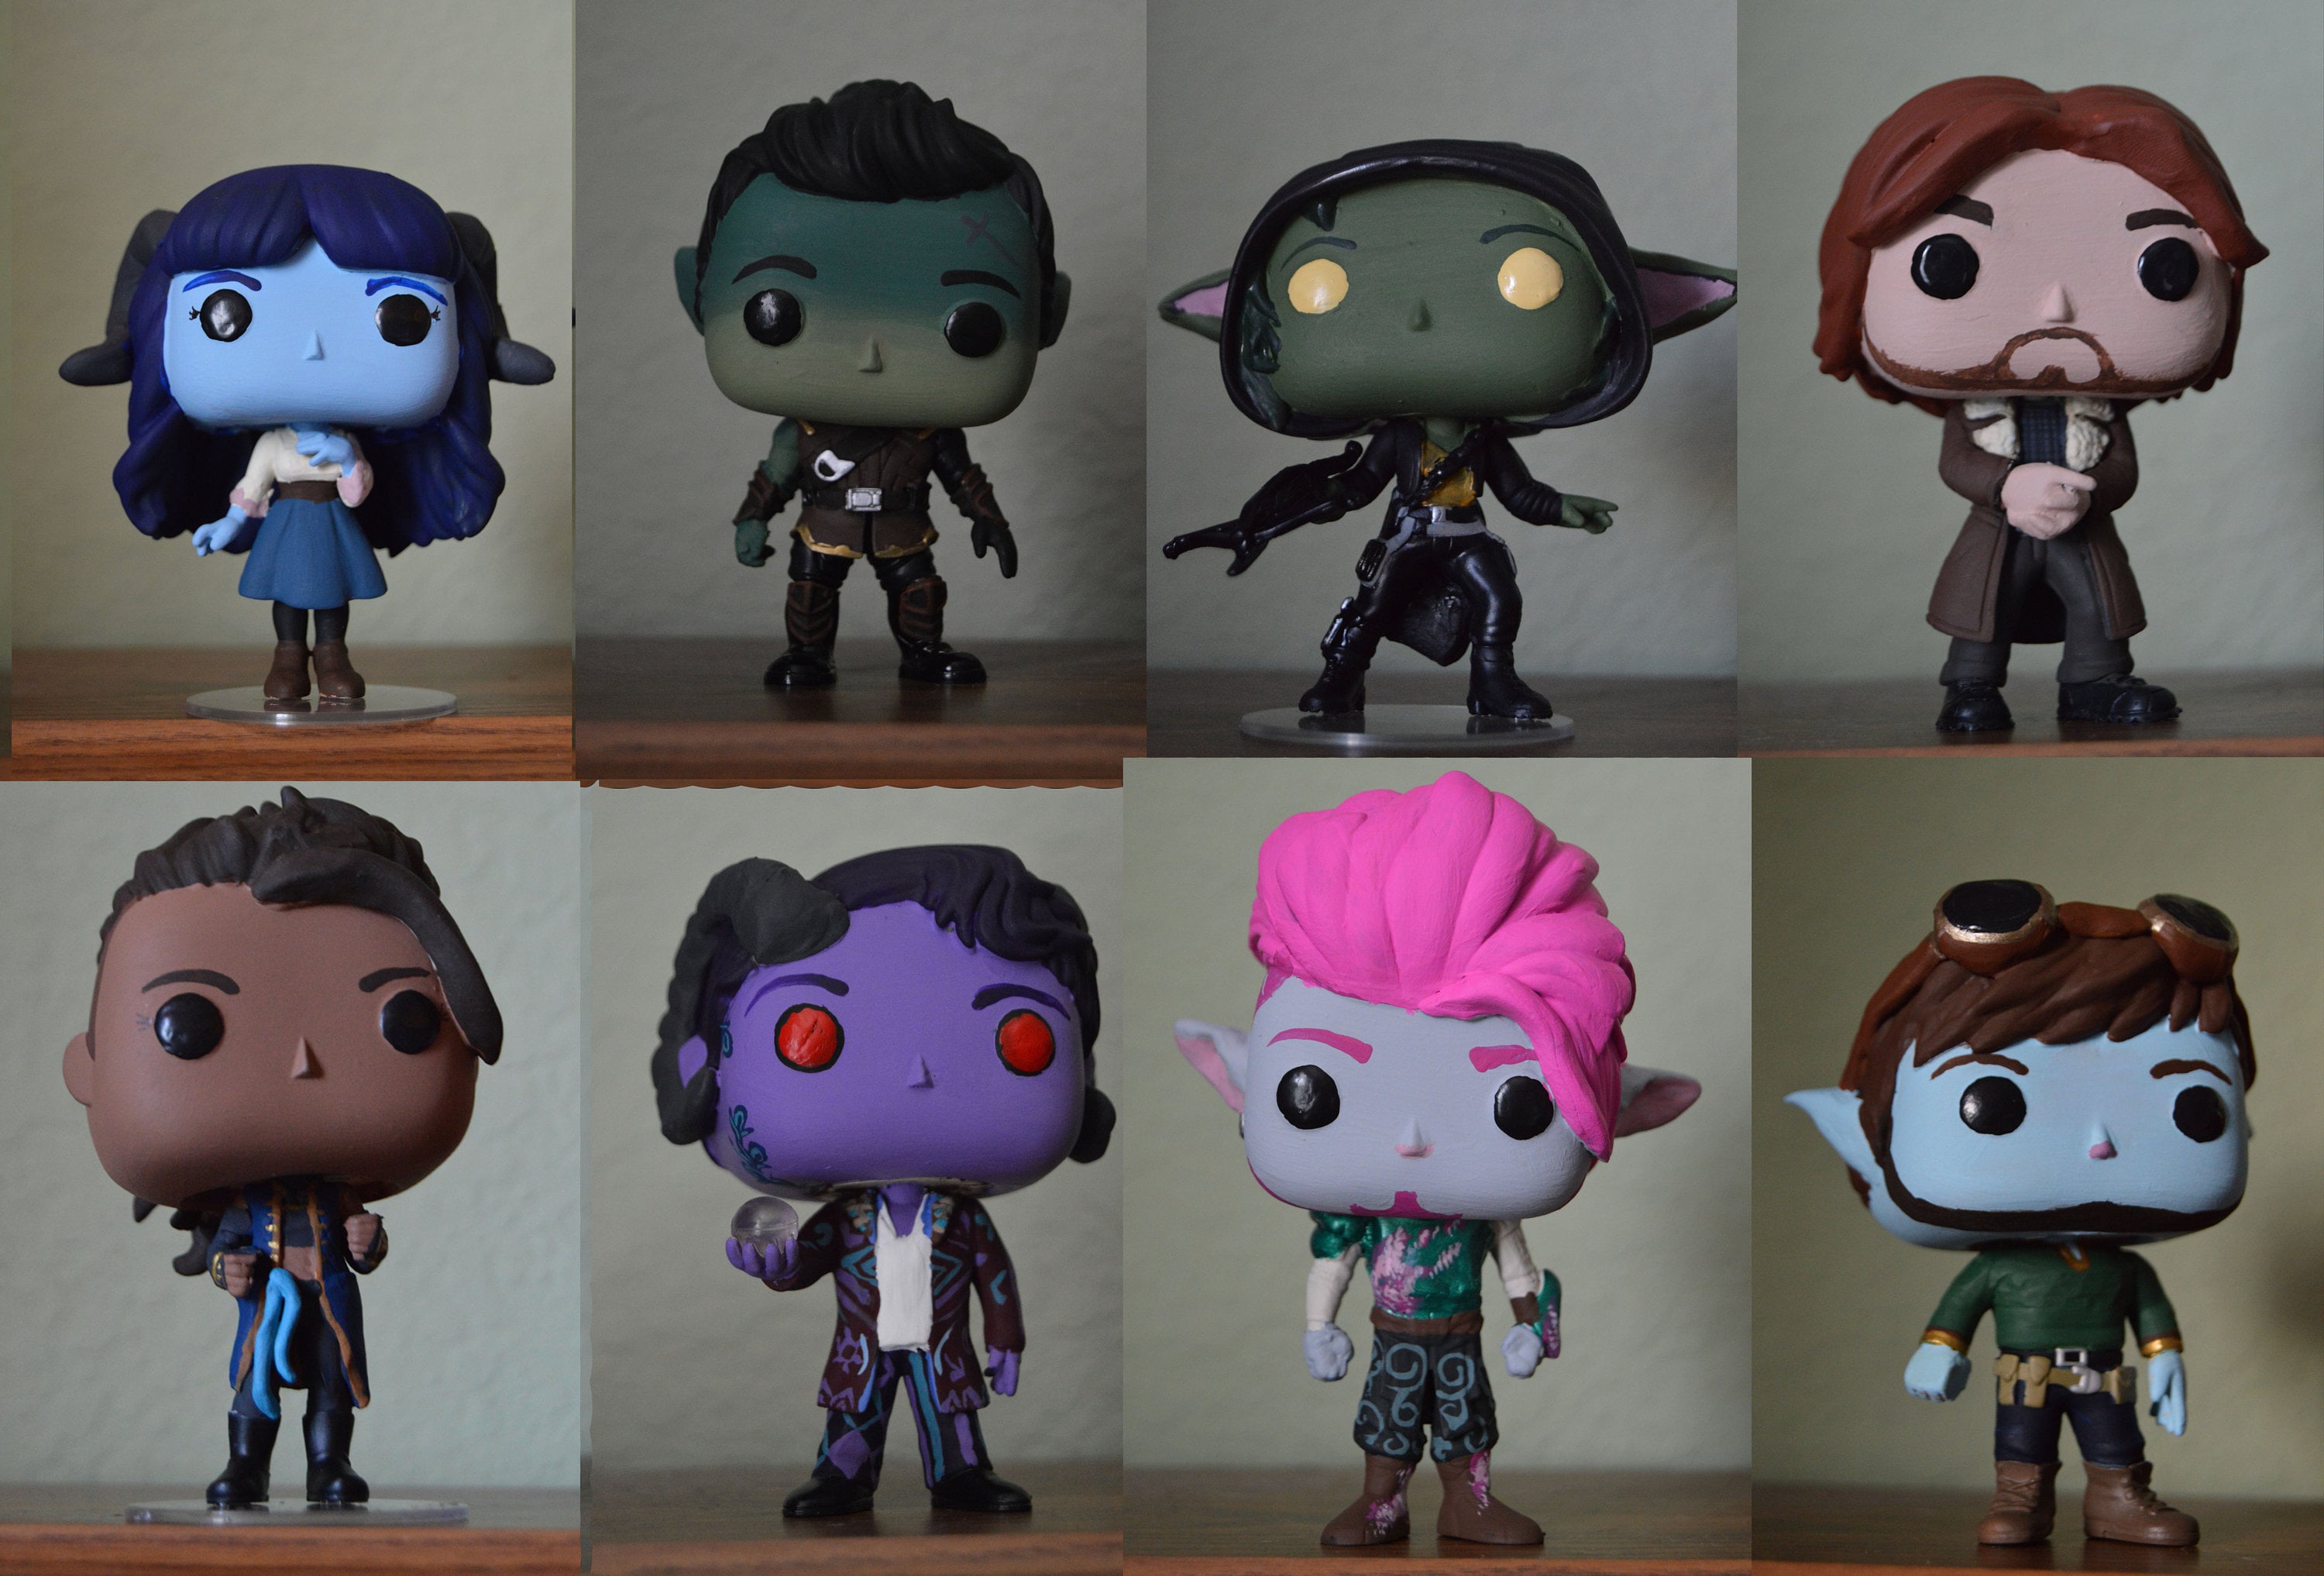 Mighty Nein From Critical Custom Pop Vinyl Figures - Etsy